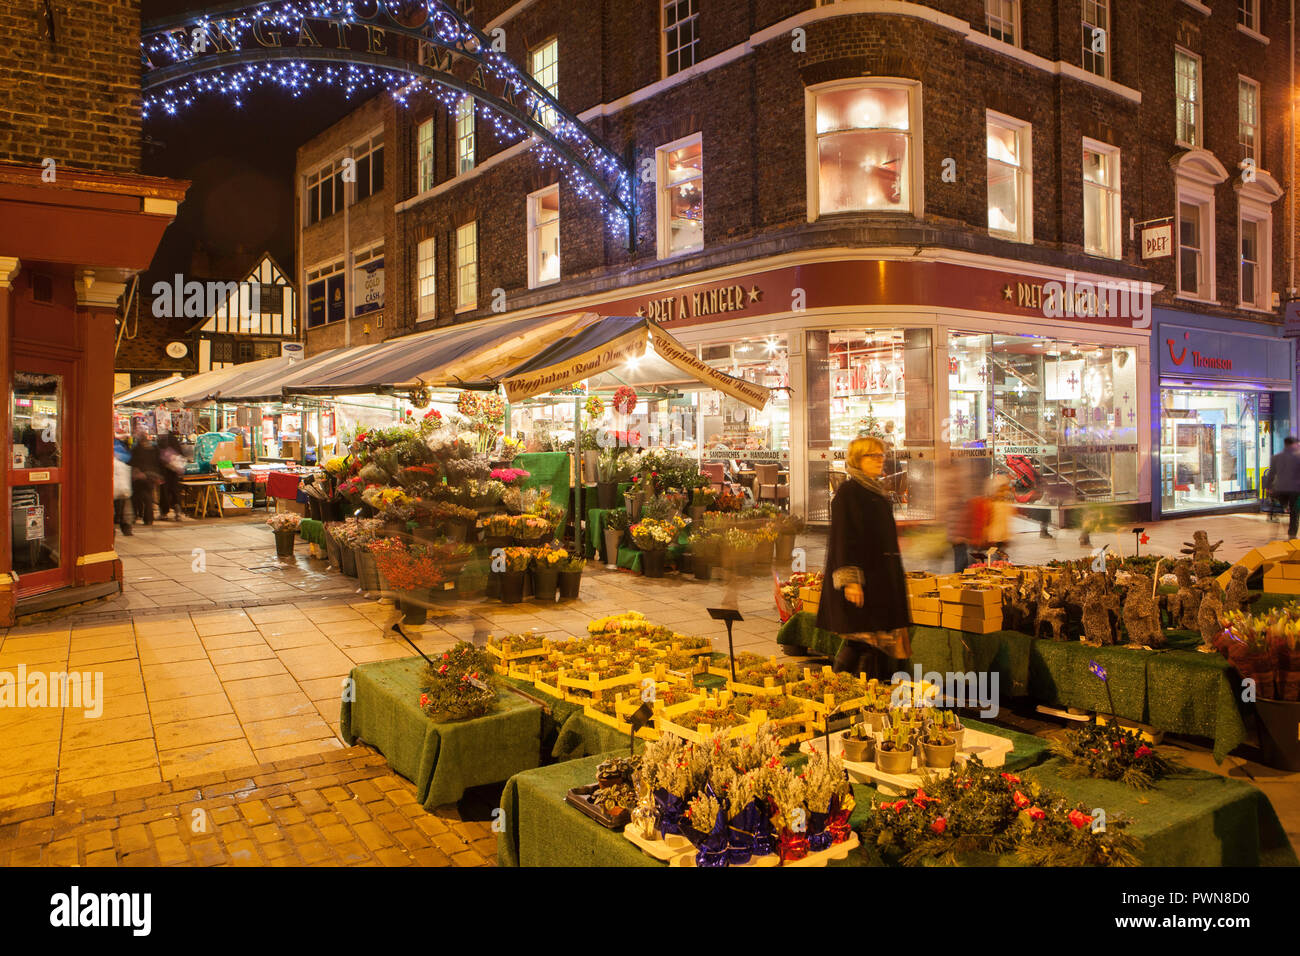 Flower stall at Newgate Market on Parliament Street in York at Christmas Stock Photo